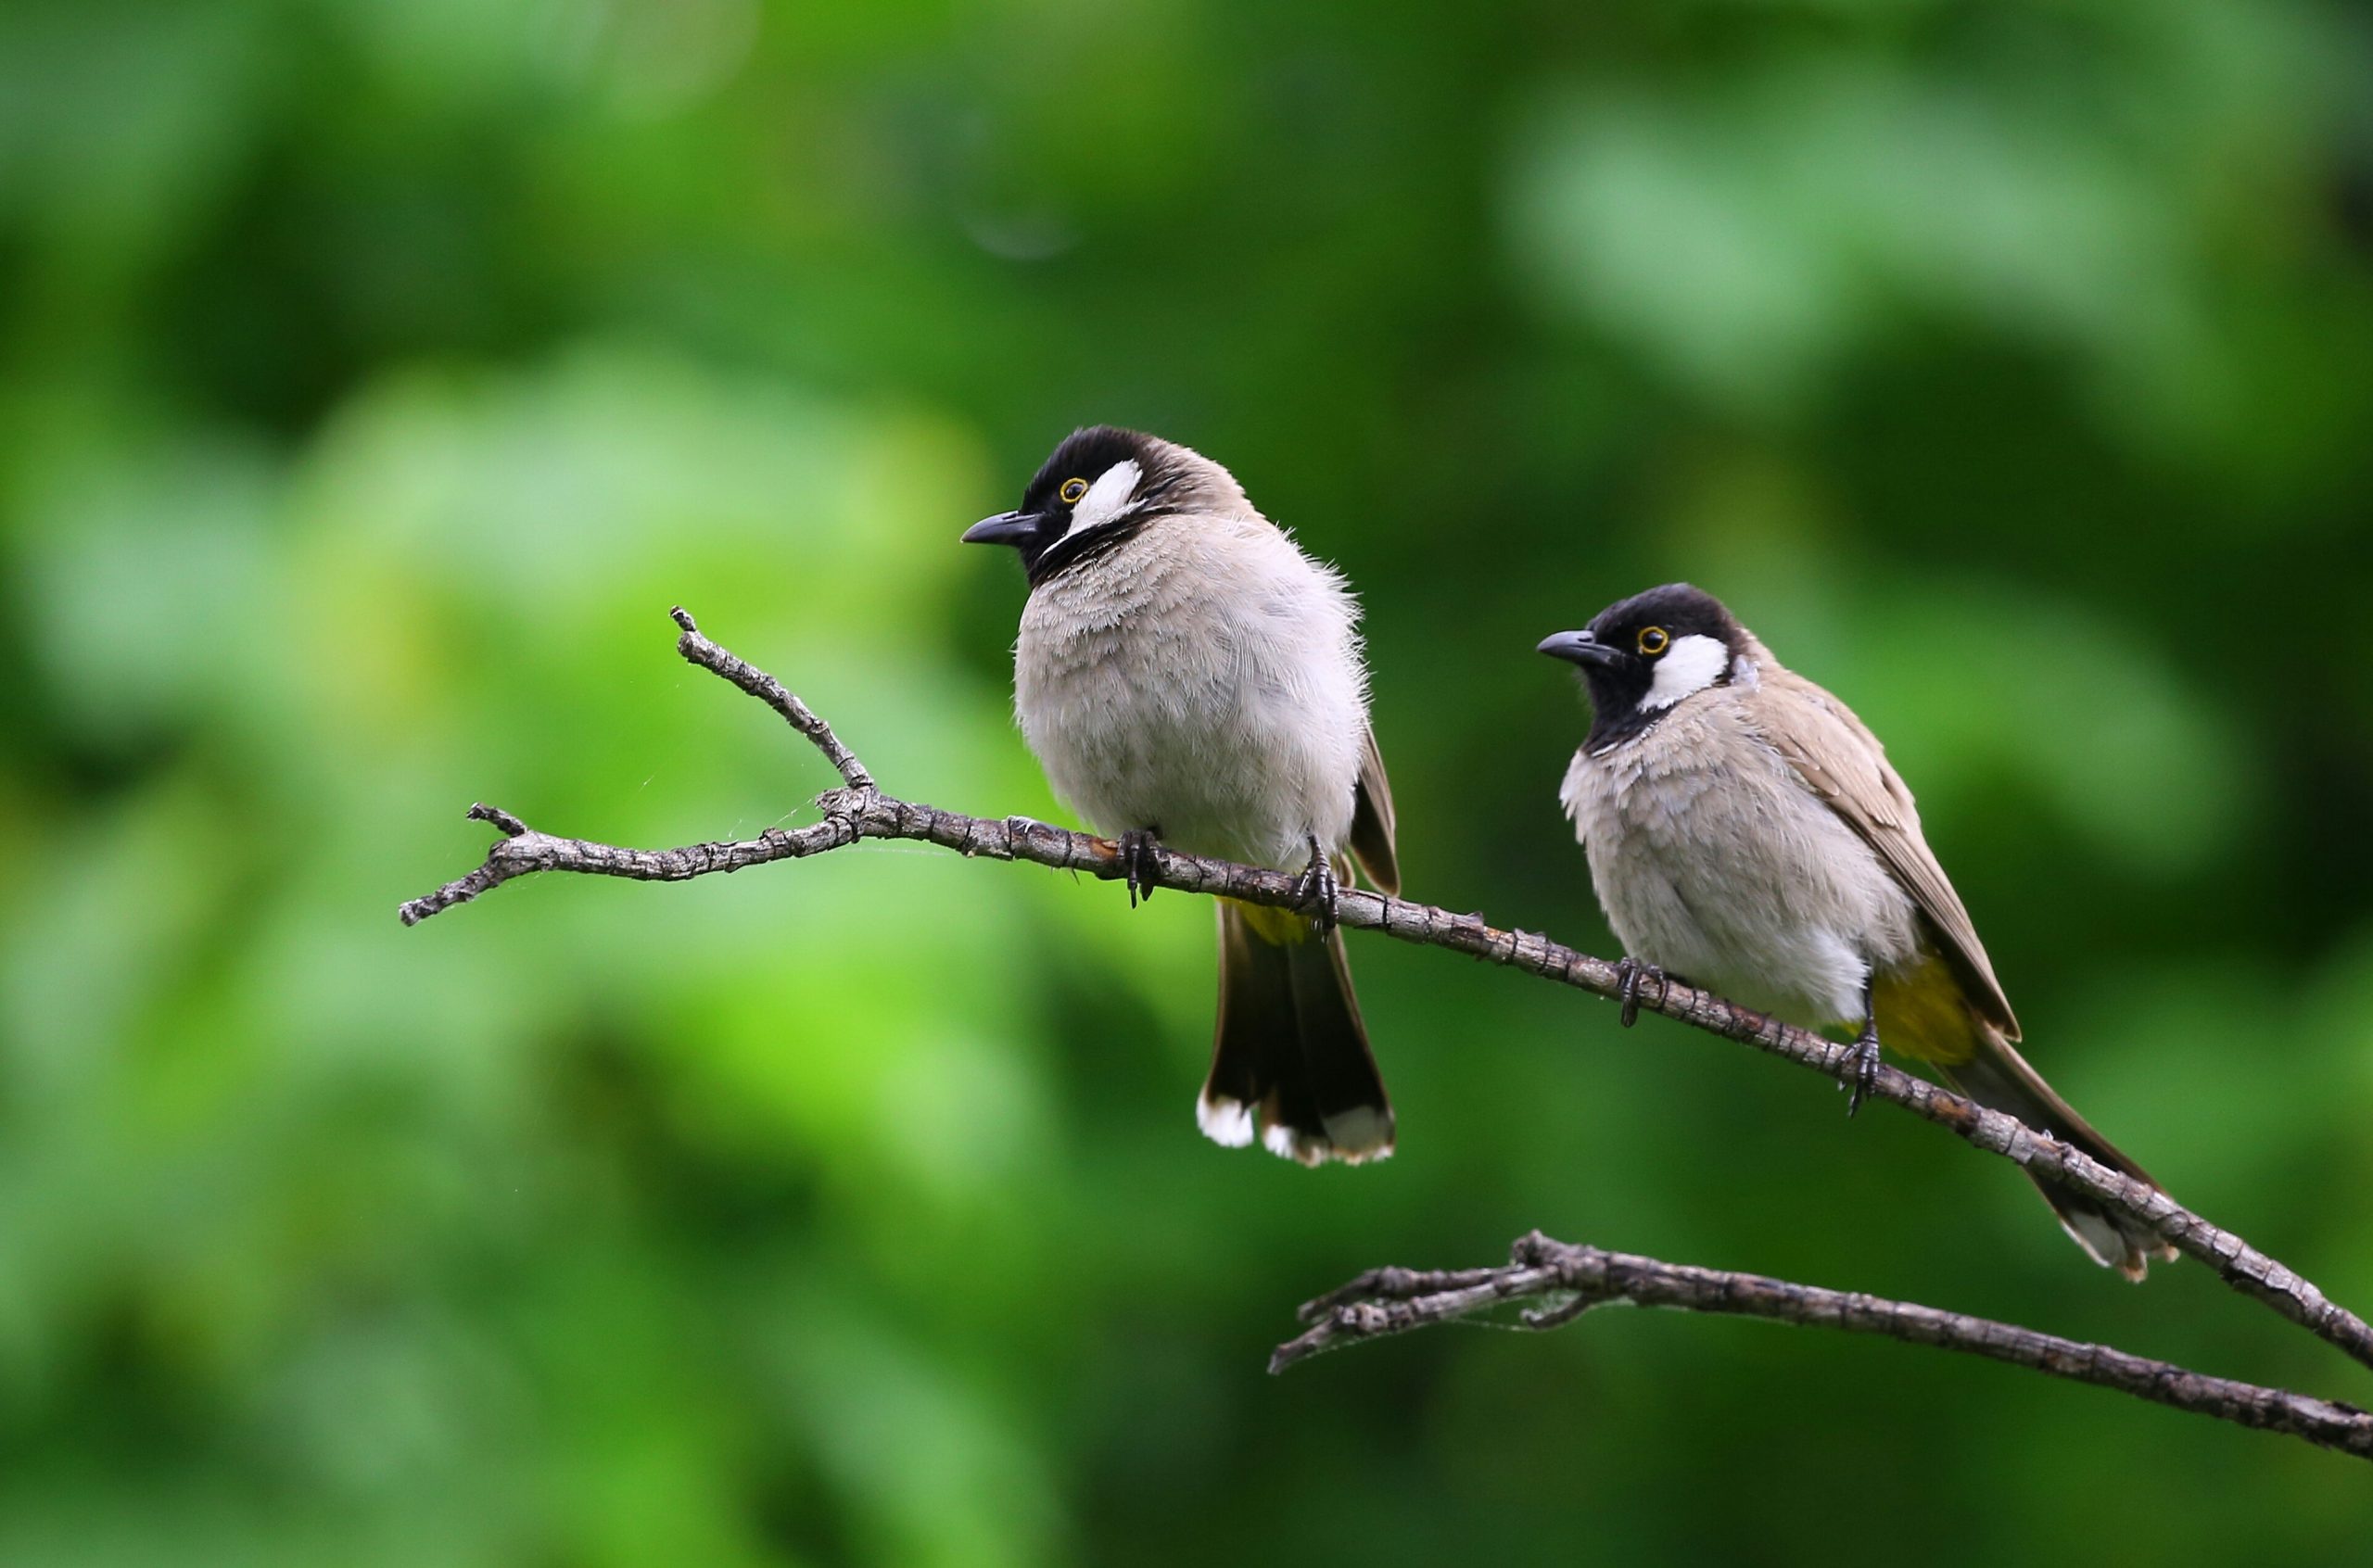 Two birds sit on a tree branch.